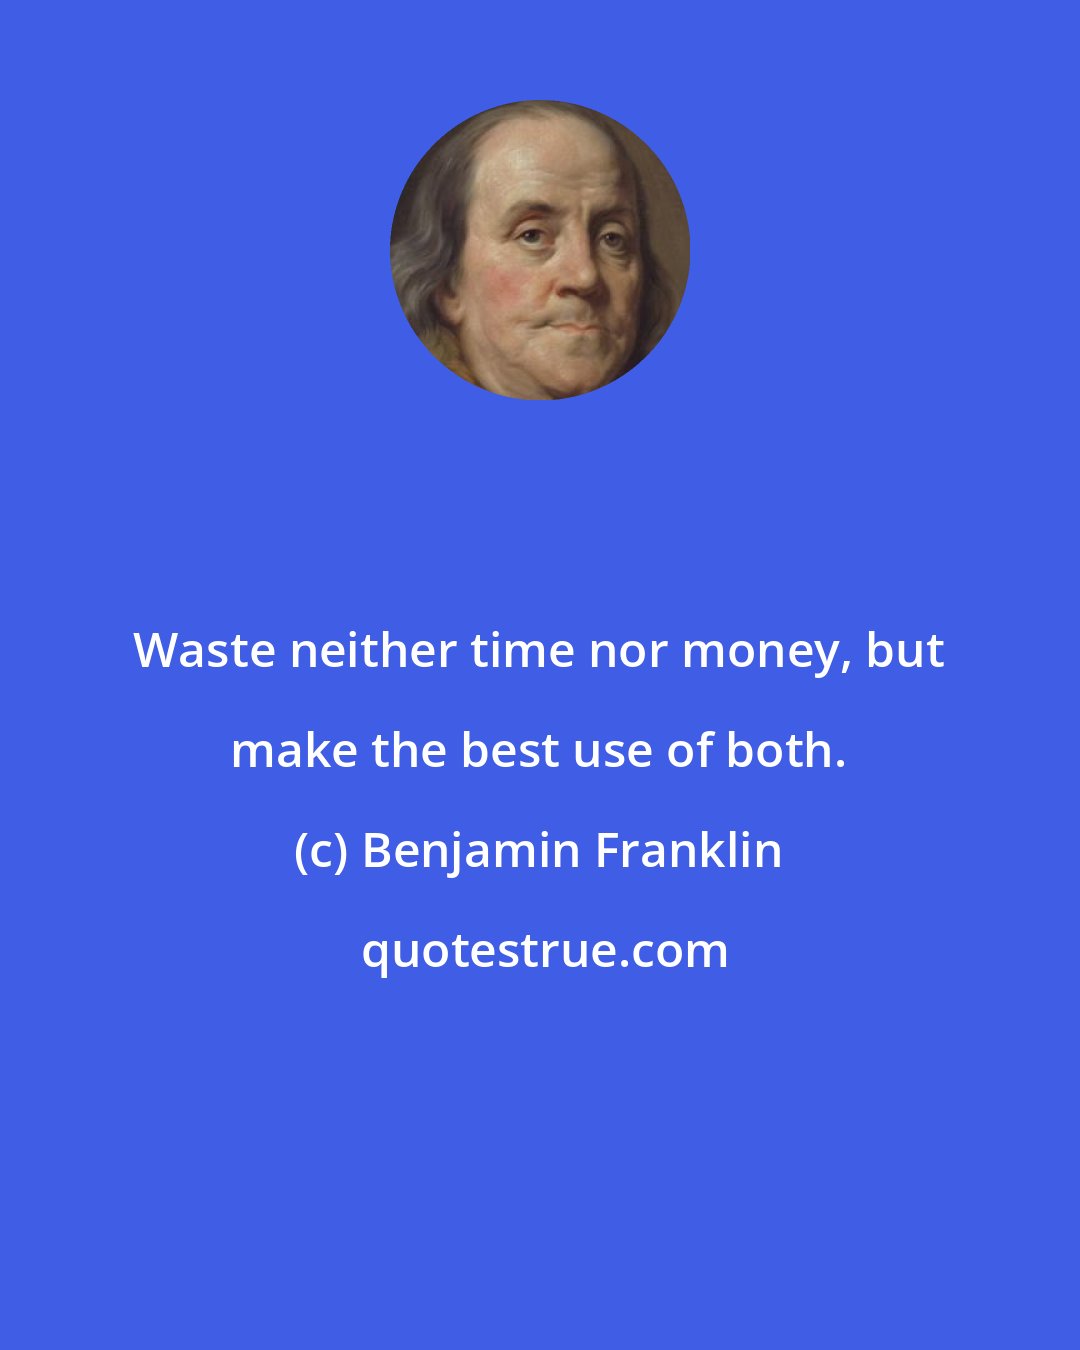 Benjamin Franklin: Waste neither time nor money, but make the best use of both.